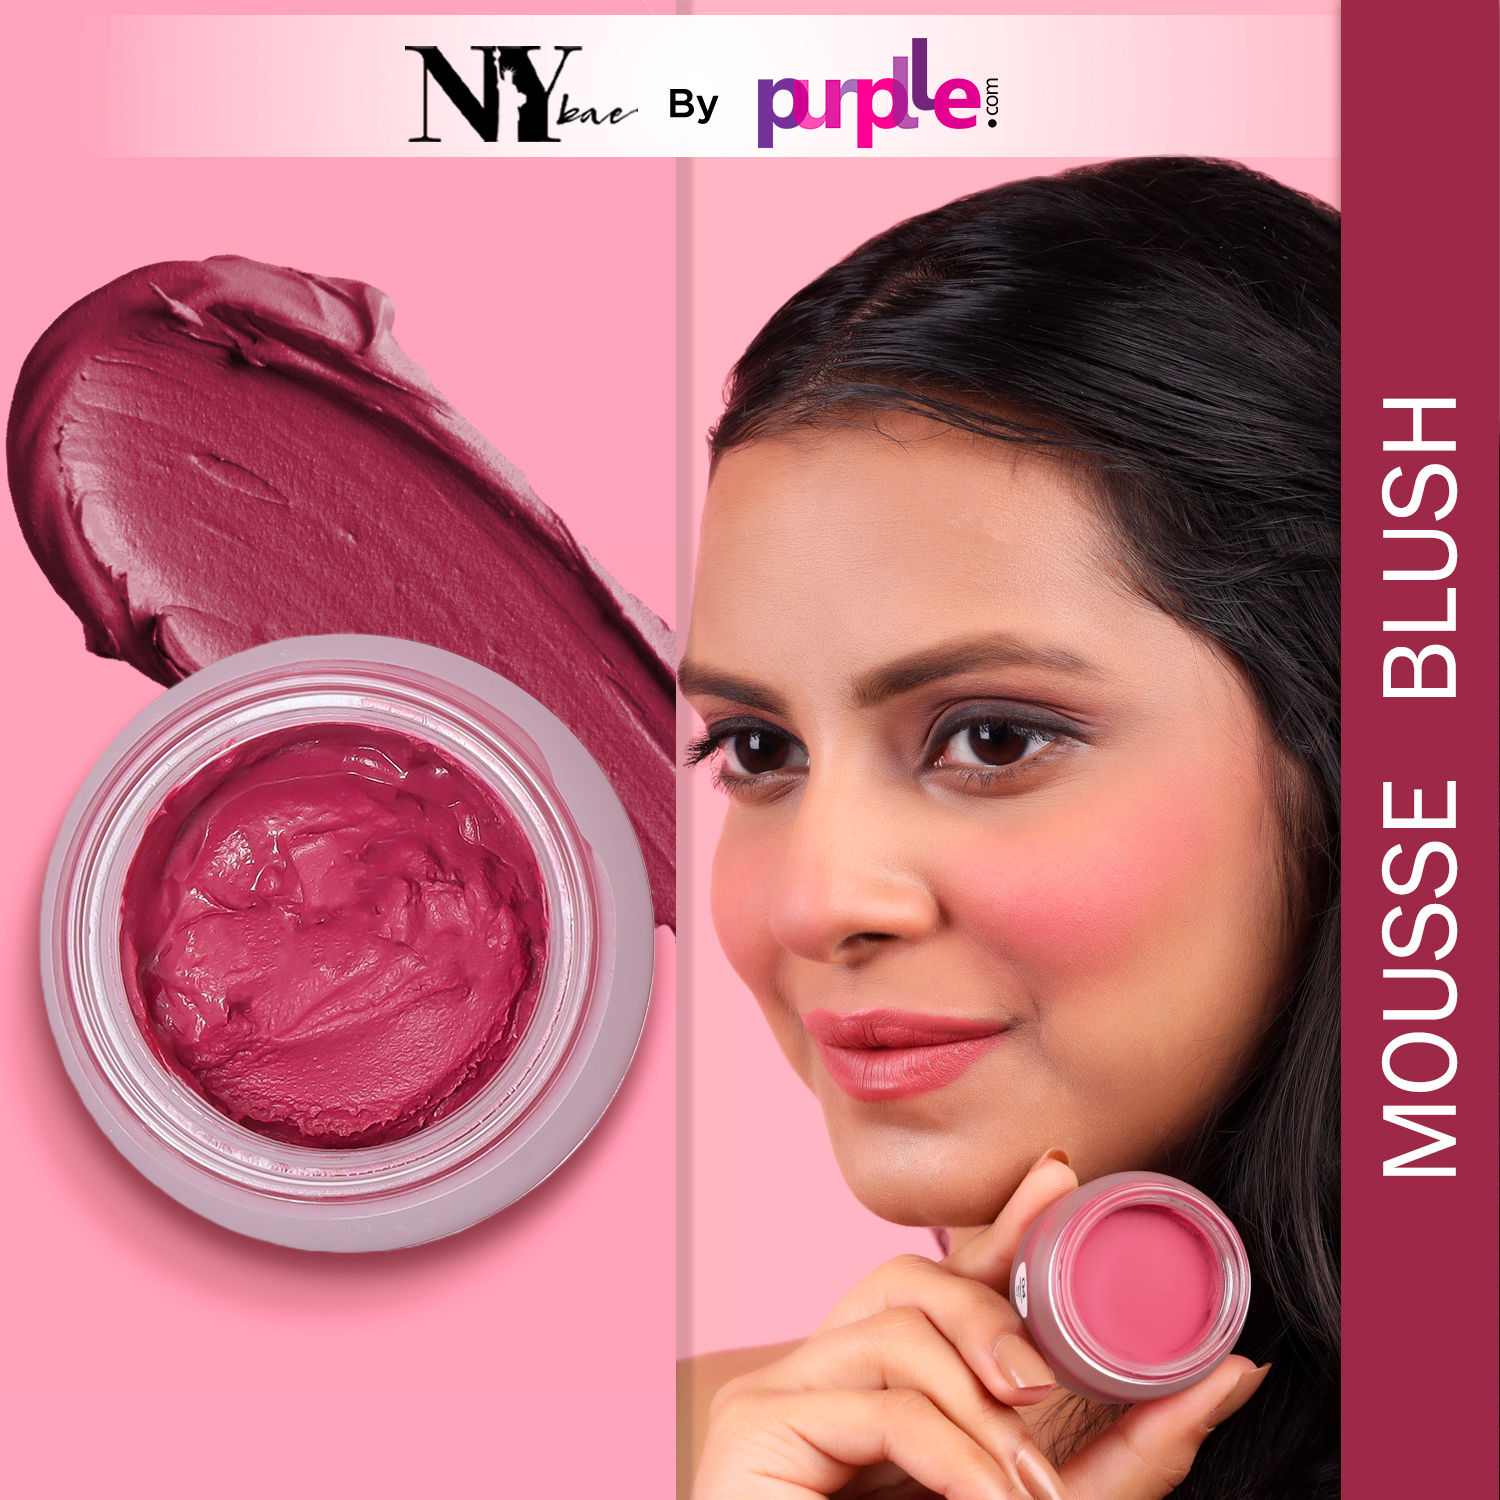 NY Bae Mousse Blush - Mulberry Bud 04 (10 gm) | Maroon | Natural Matte Finish | Satin Soft | Highly Pigmented | Lightweight | Super Blendable